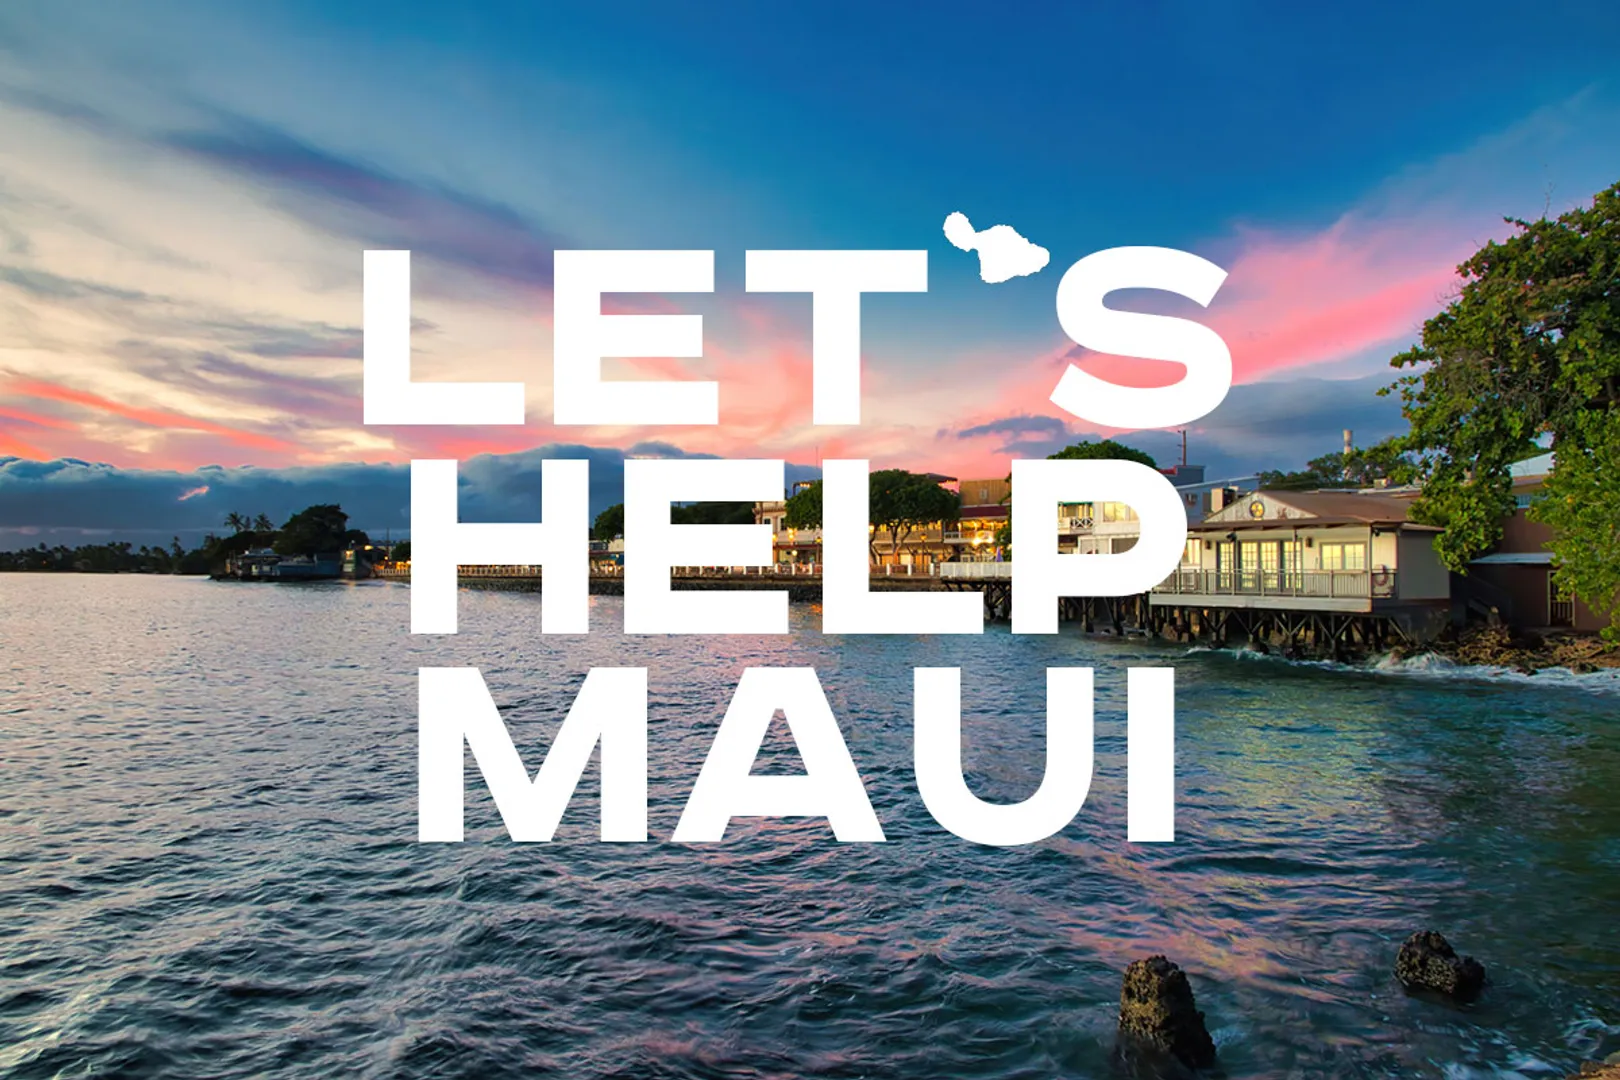 Let Me Start With That I Love Hawaii Especially Maui!!  

The Maui fires devastated the island, claiming many lives and destroying homes and businesses. Let's show compassion for those affected by the fires. If possible, donate to relief efforts.

#MauiStrong #Wildfires #Lahaina  